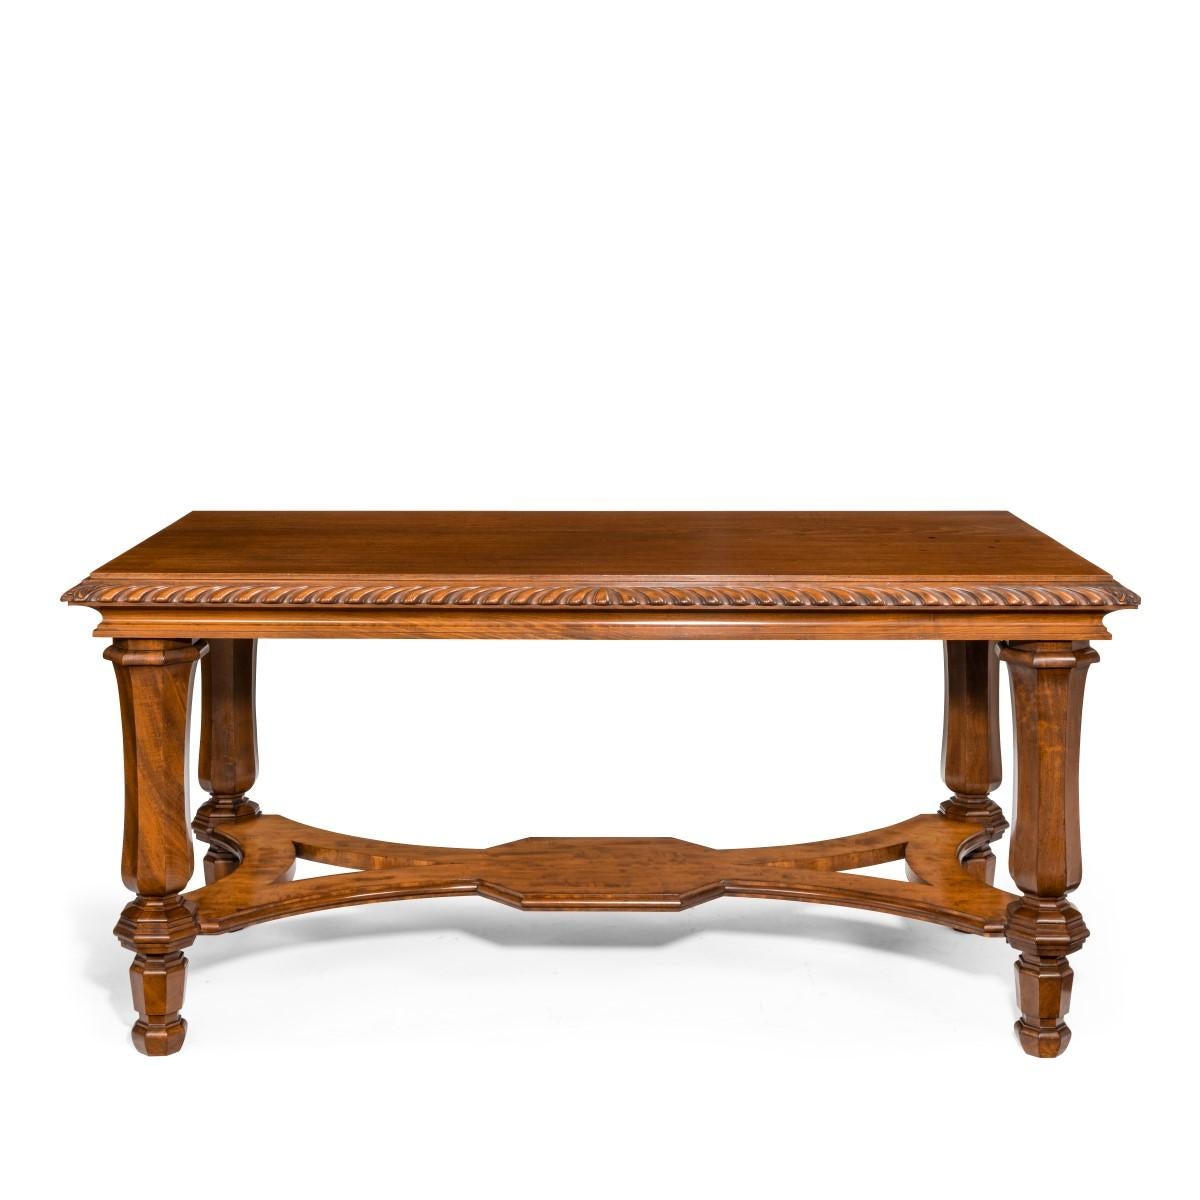 A mahogany centre table from Clumber Park, seat of the 7th Duke of Newcastle, the rectangular top with a gadrooned edge set upon four sturdy tapering and shaped hexagonal legs, joined to a flat X-frame stretcher, bearing an inventory label with a